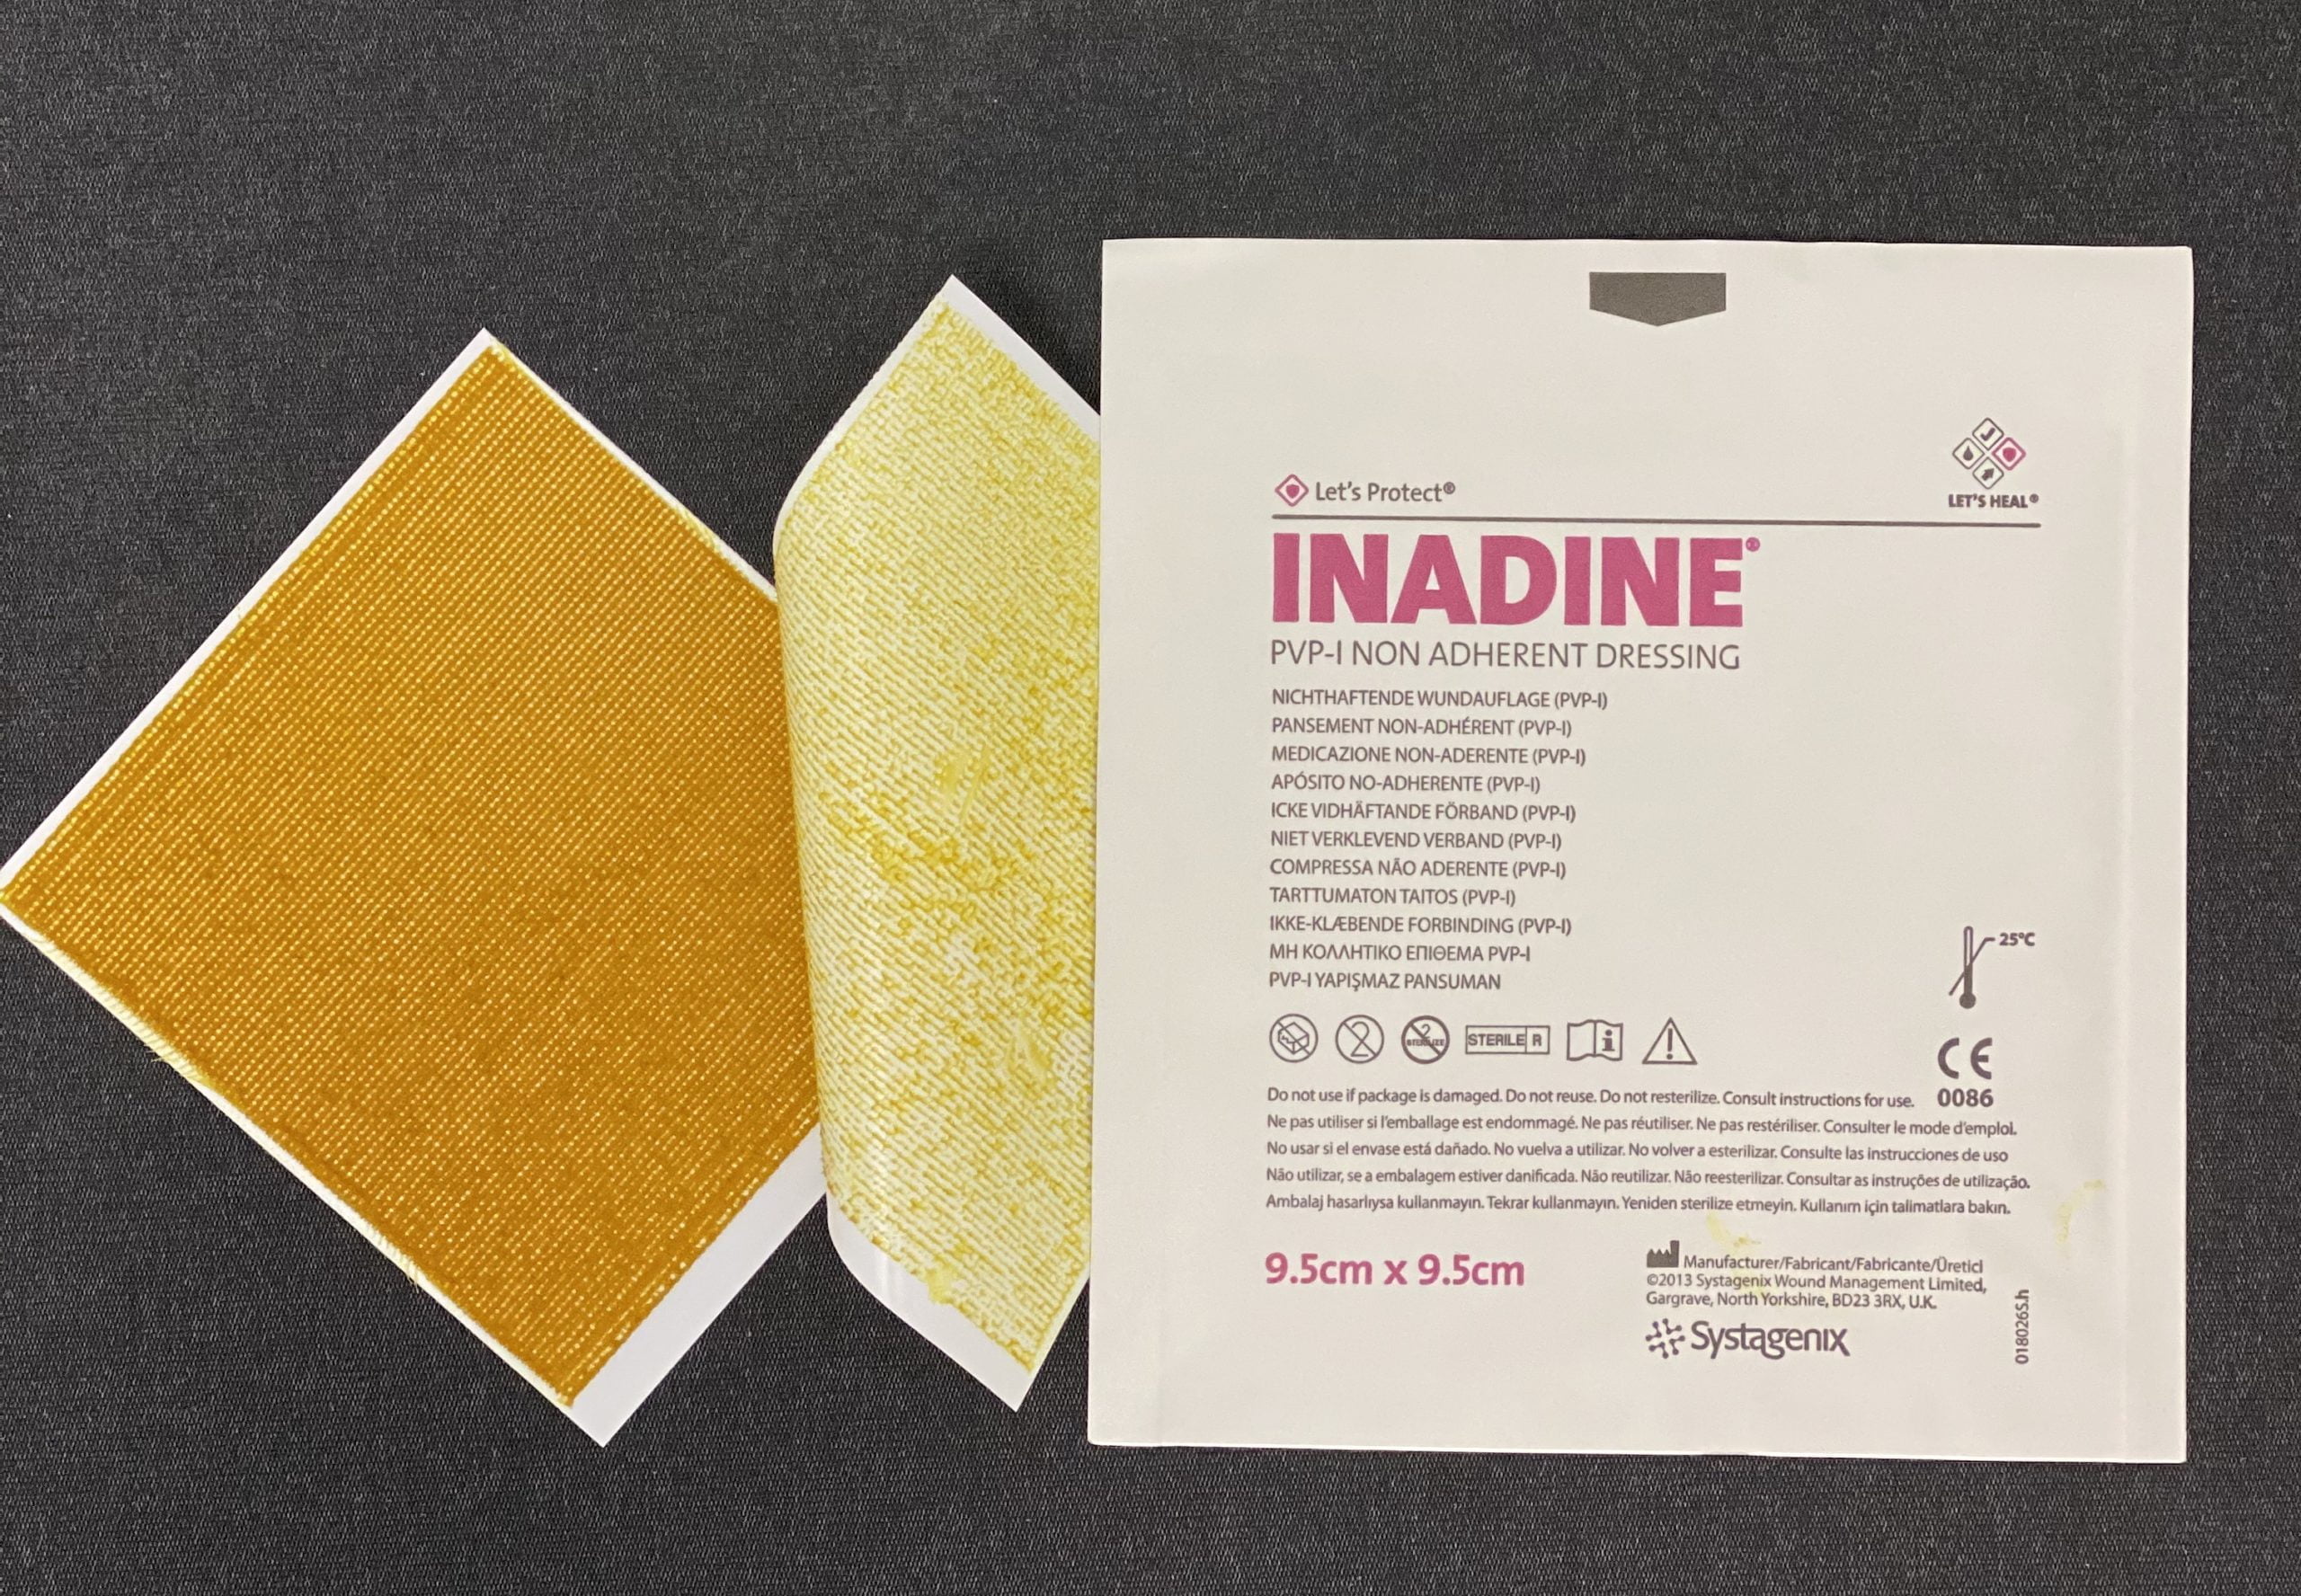 Inadine Dressing 9.5cm by 9.5cm 10's